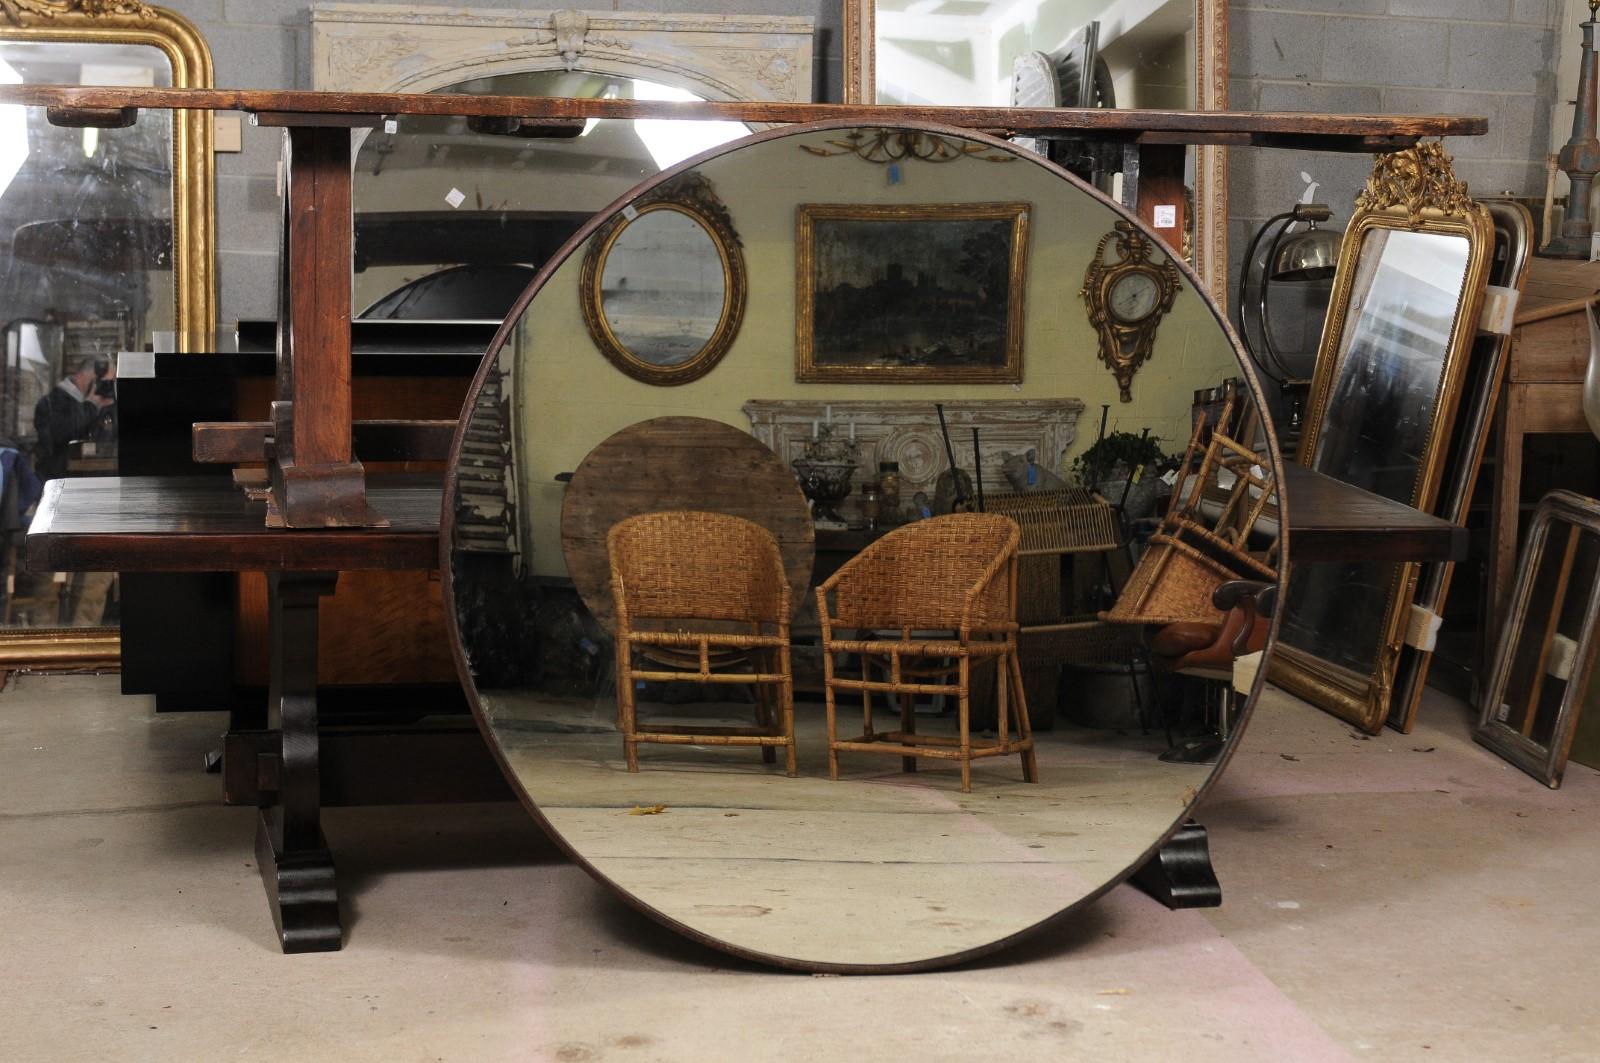 A contemporary French industrial circular mirror from the 21st century with iron frame taken from a car wash. When we tell you where this huge round mirror with its original and handsome frame came from you will be amazed: a French car wash! We know